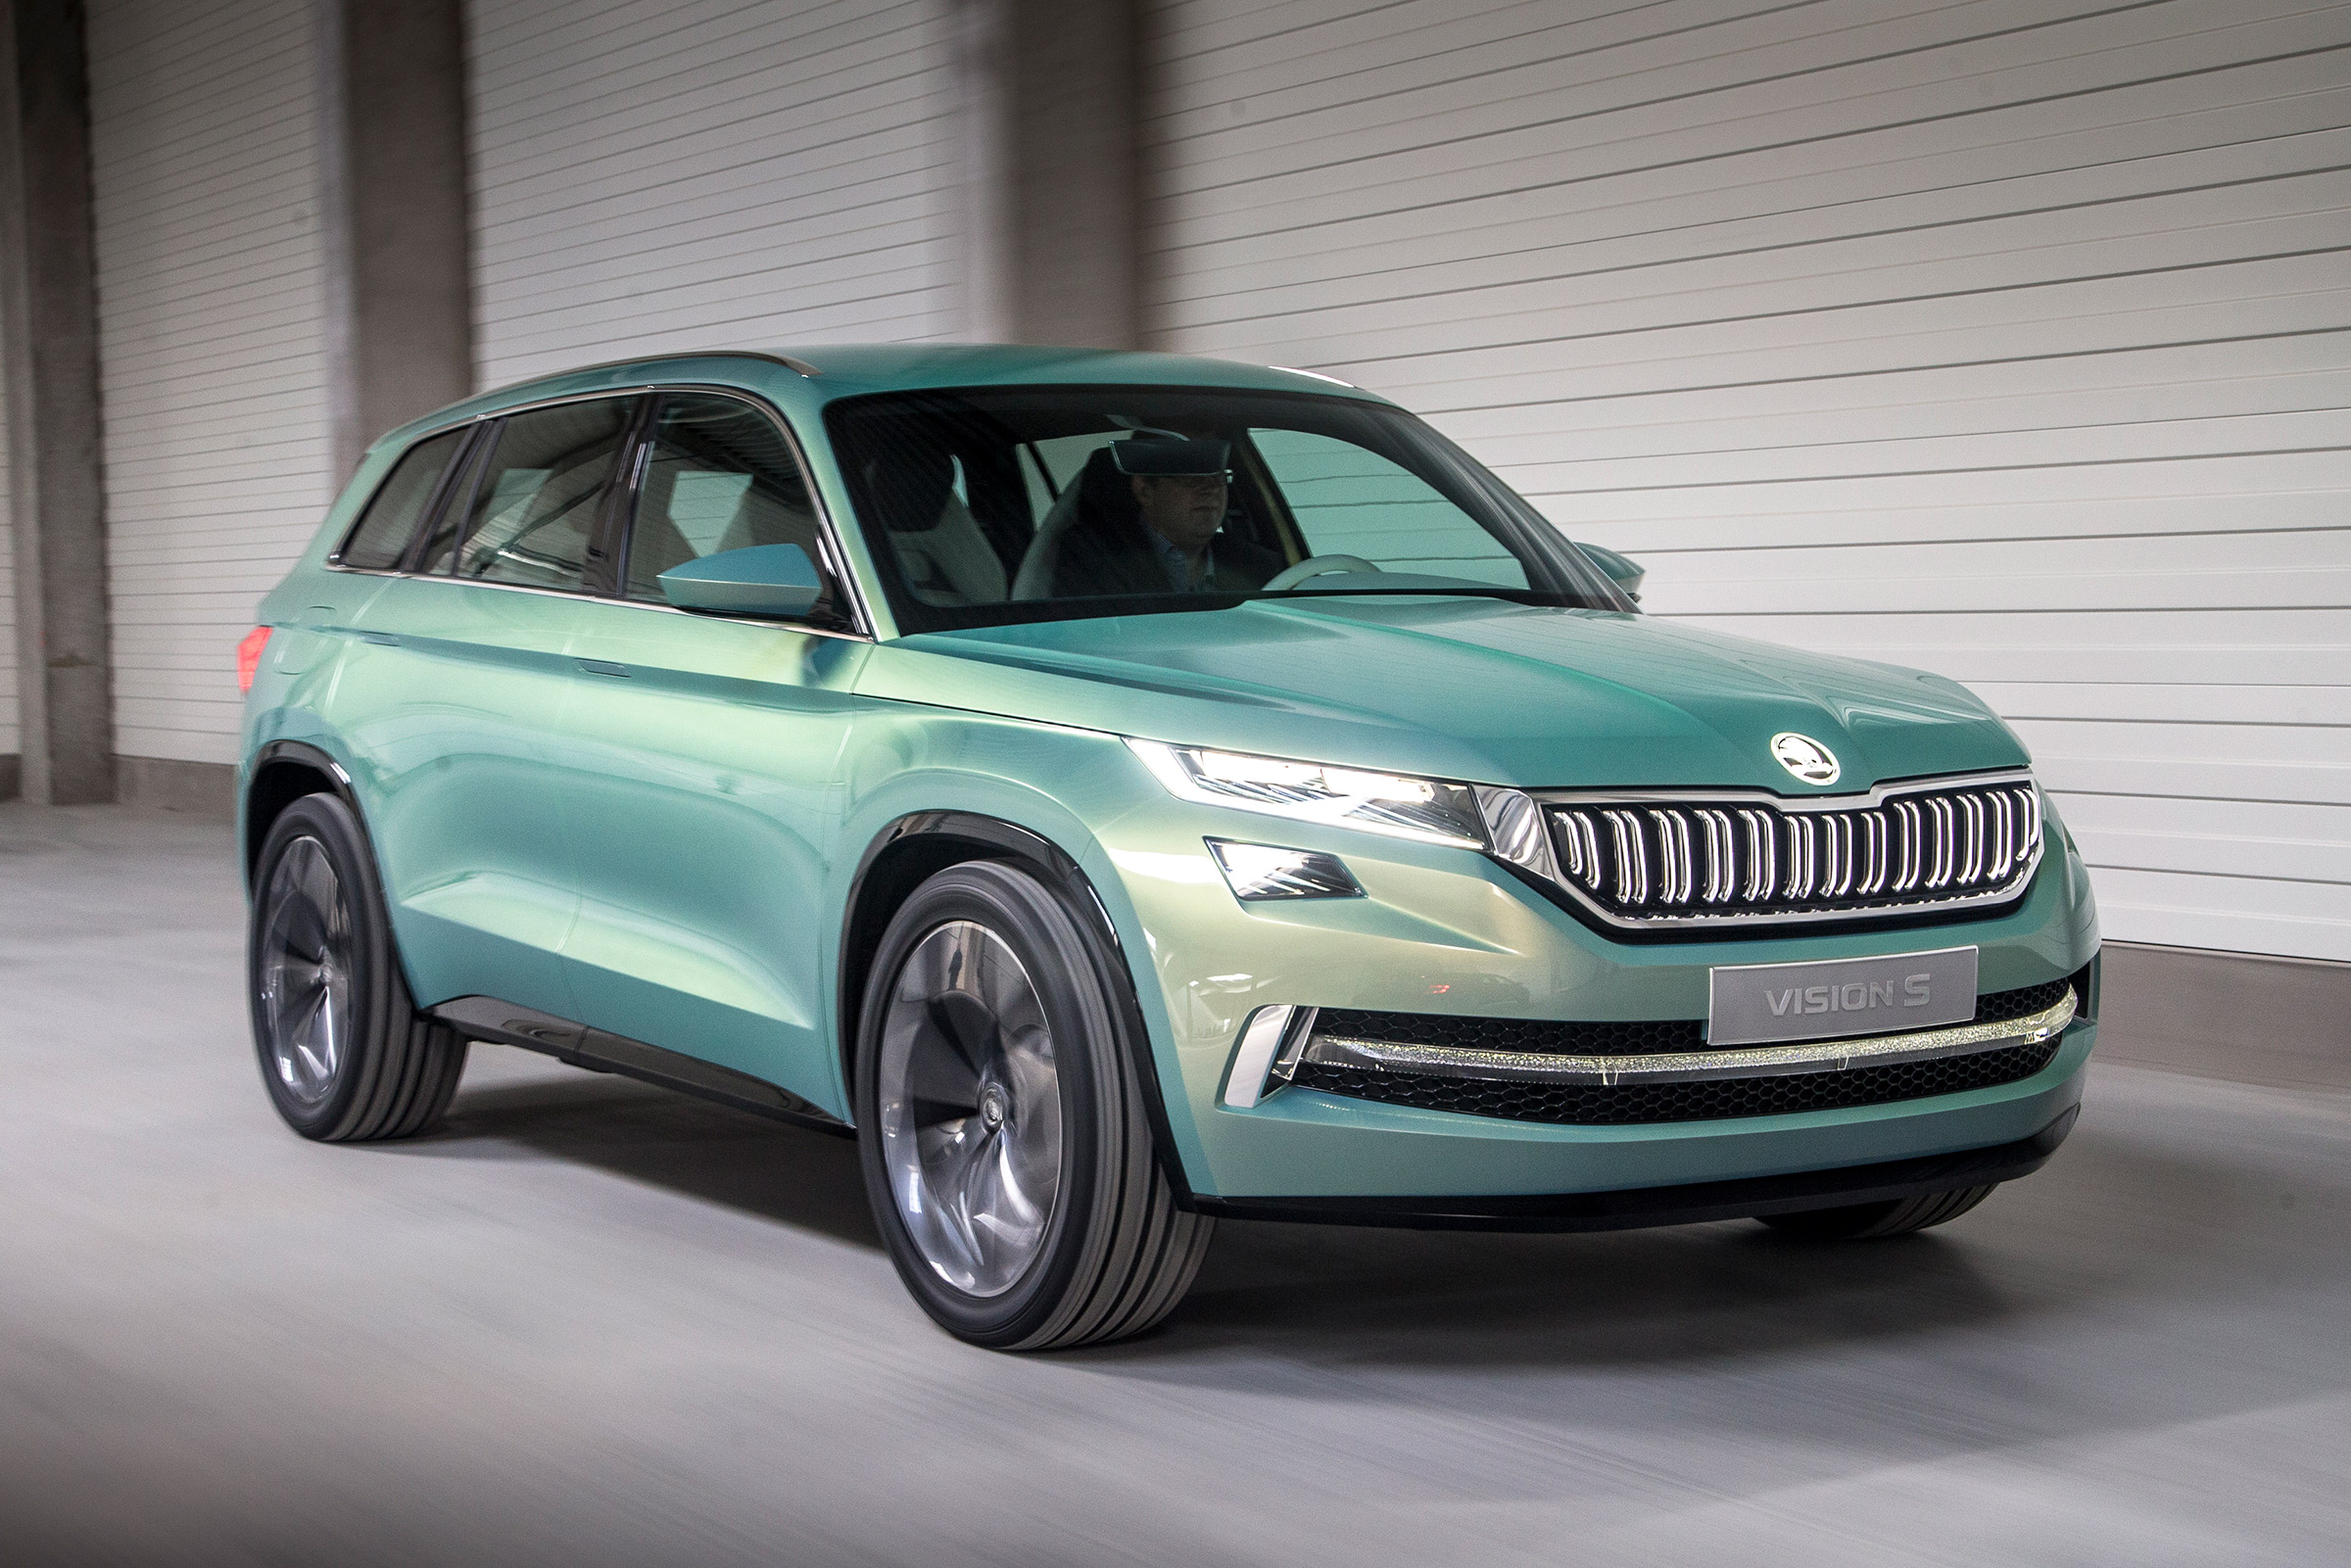 Skoda Vision S concept review: becoming the Kodiaq  Auto 